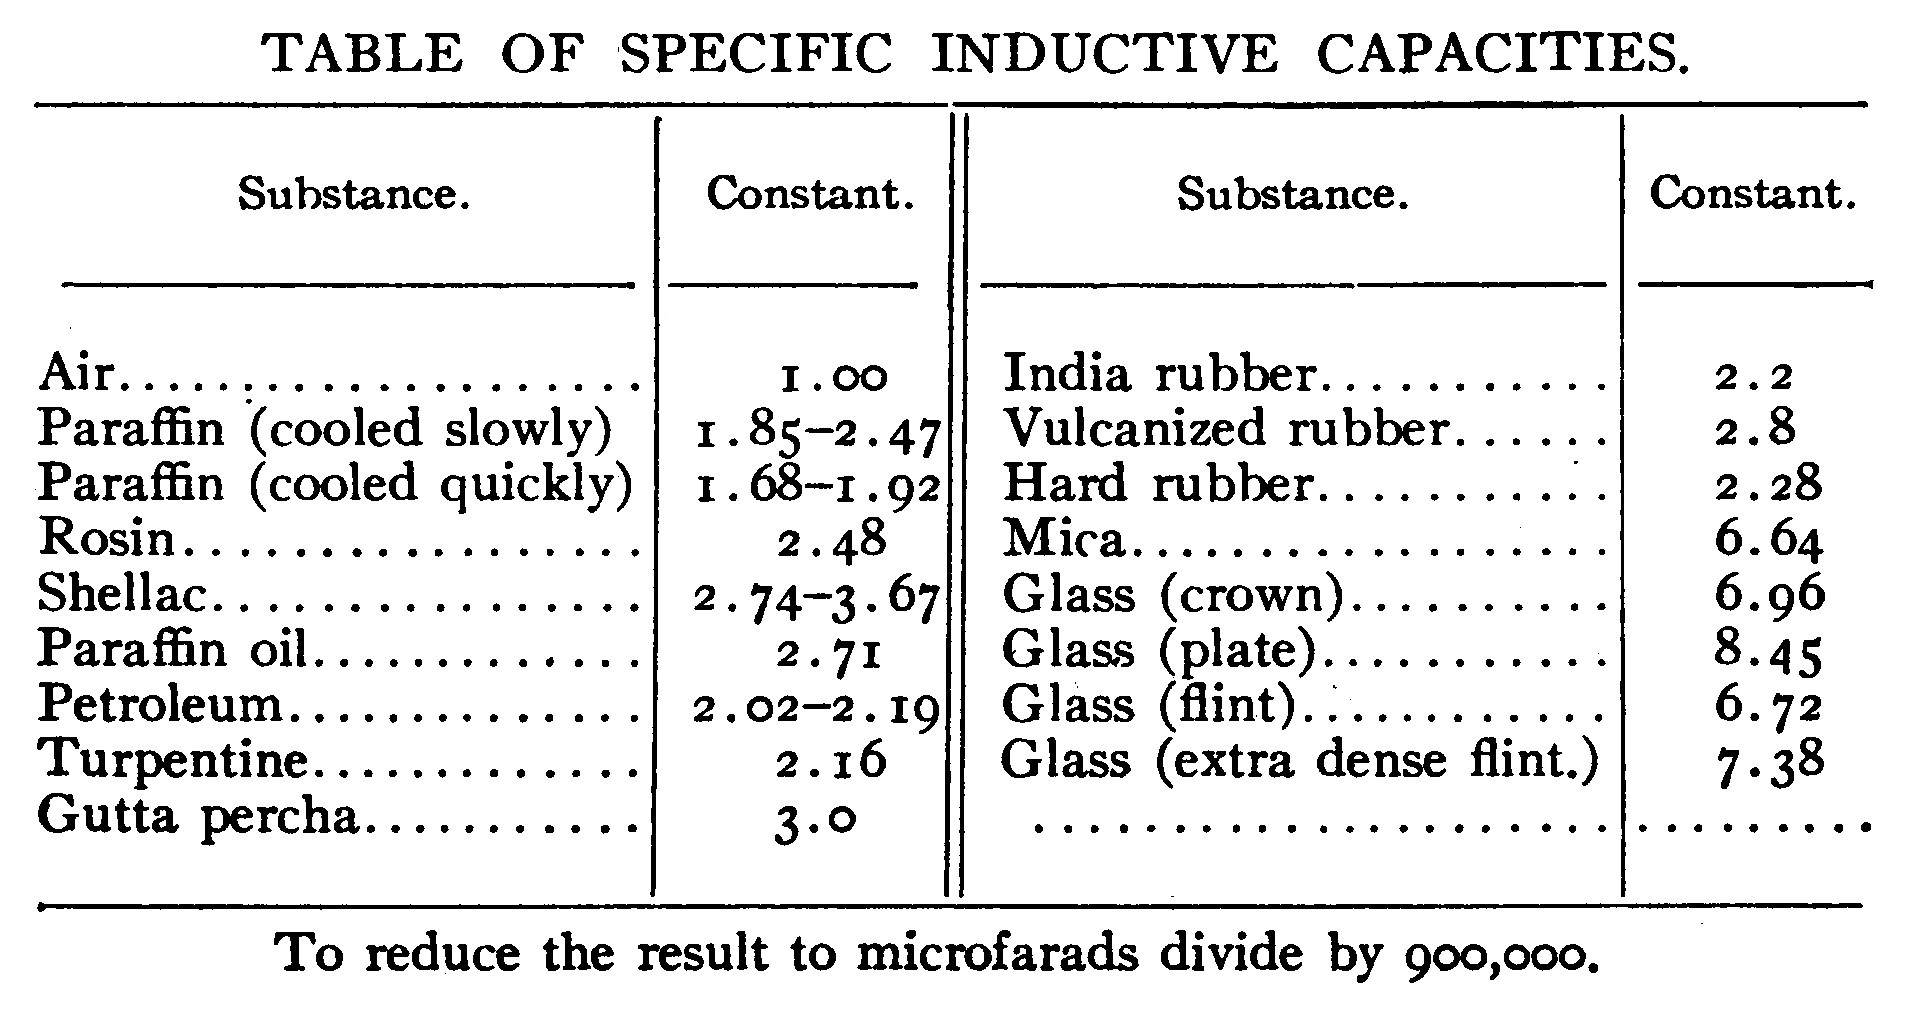 TABLE OF SPECIFIC INDUCTIVE CAPACITIES.